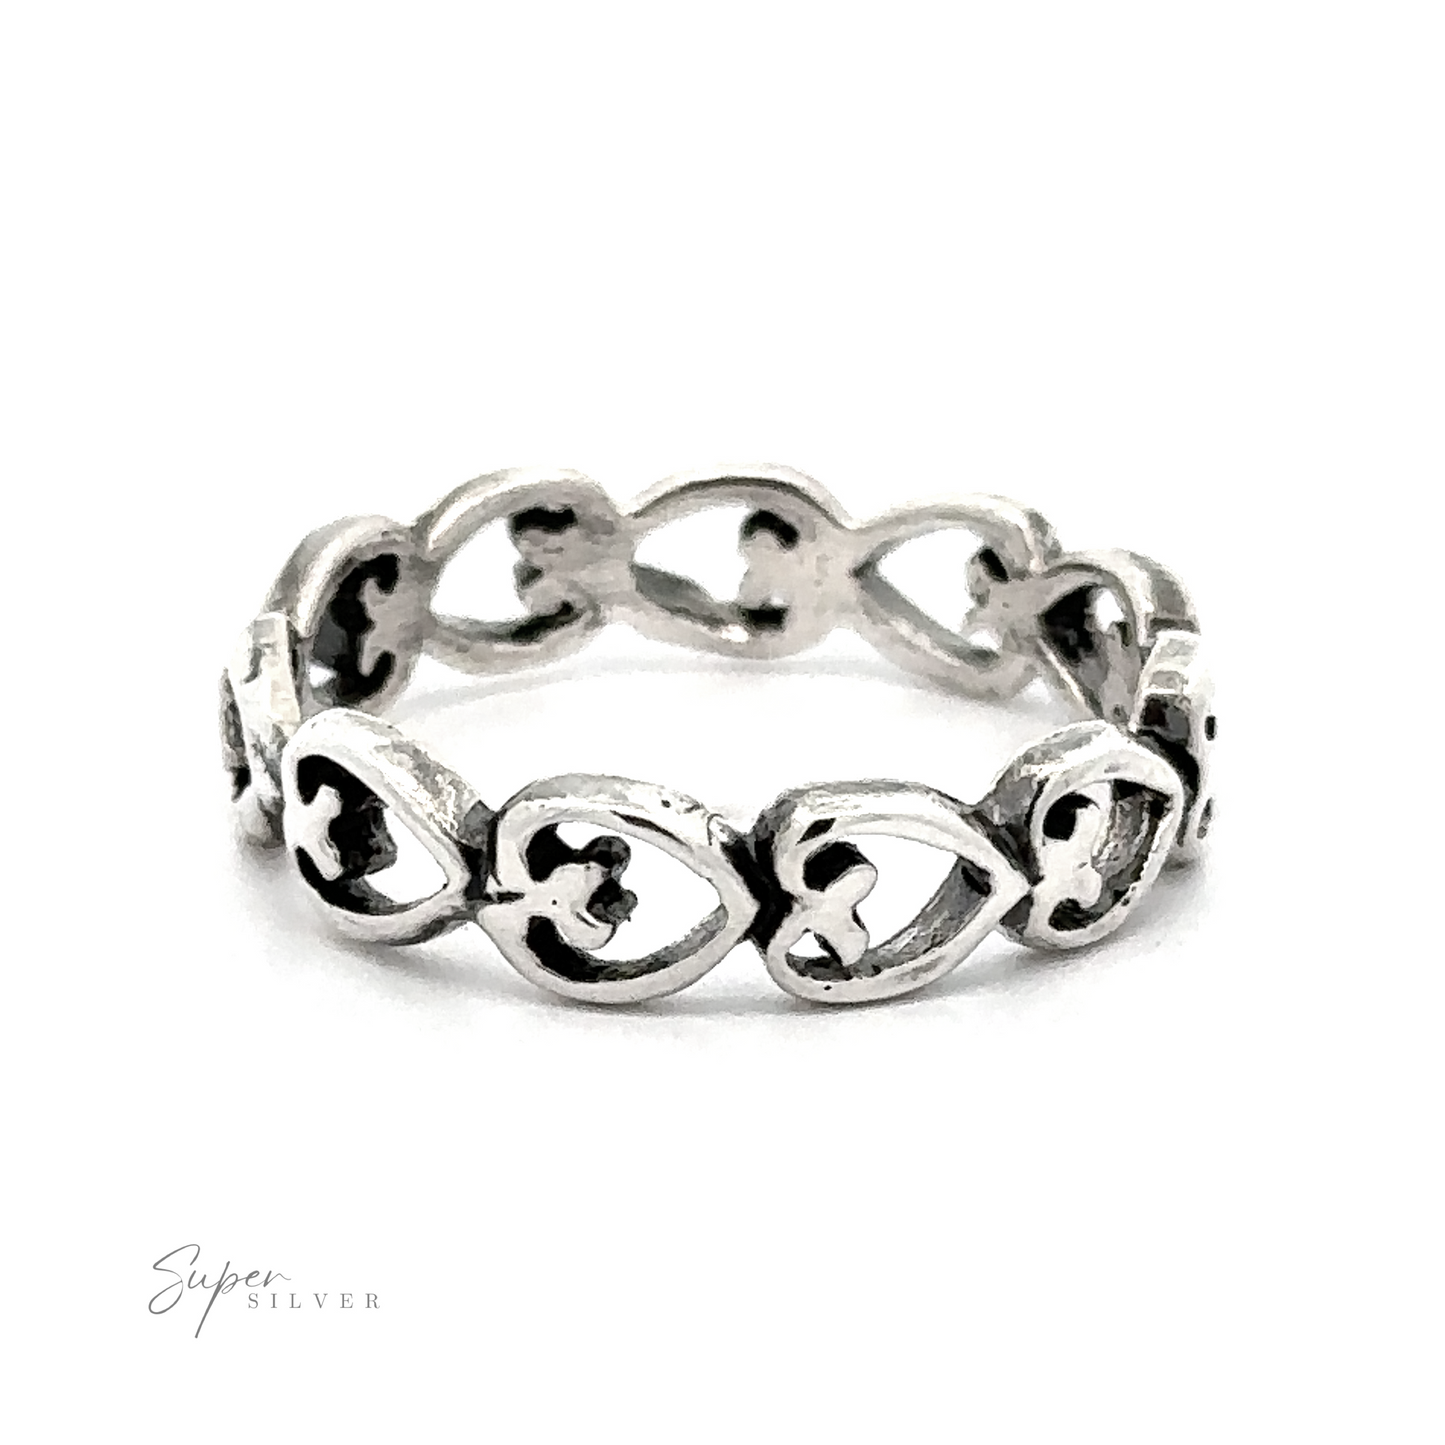 Horizontal Hearts Band ring featuring a linked heart design on a white background.